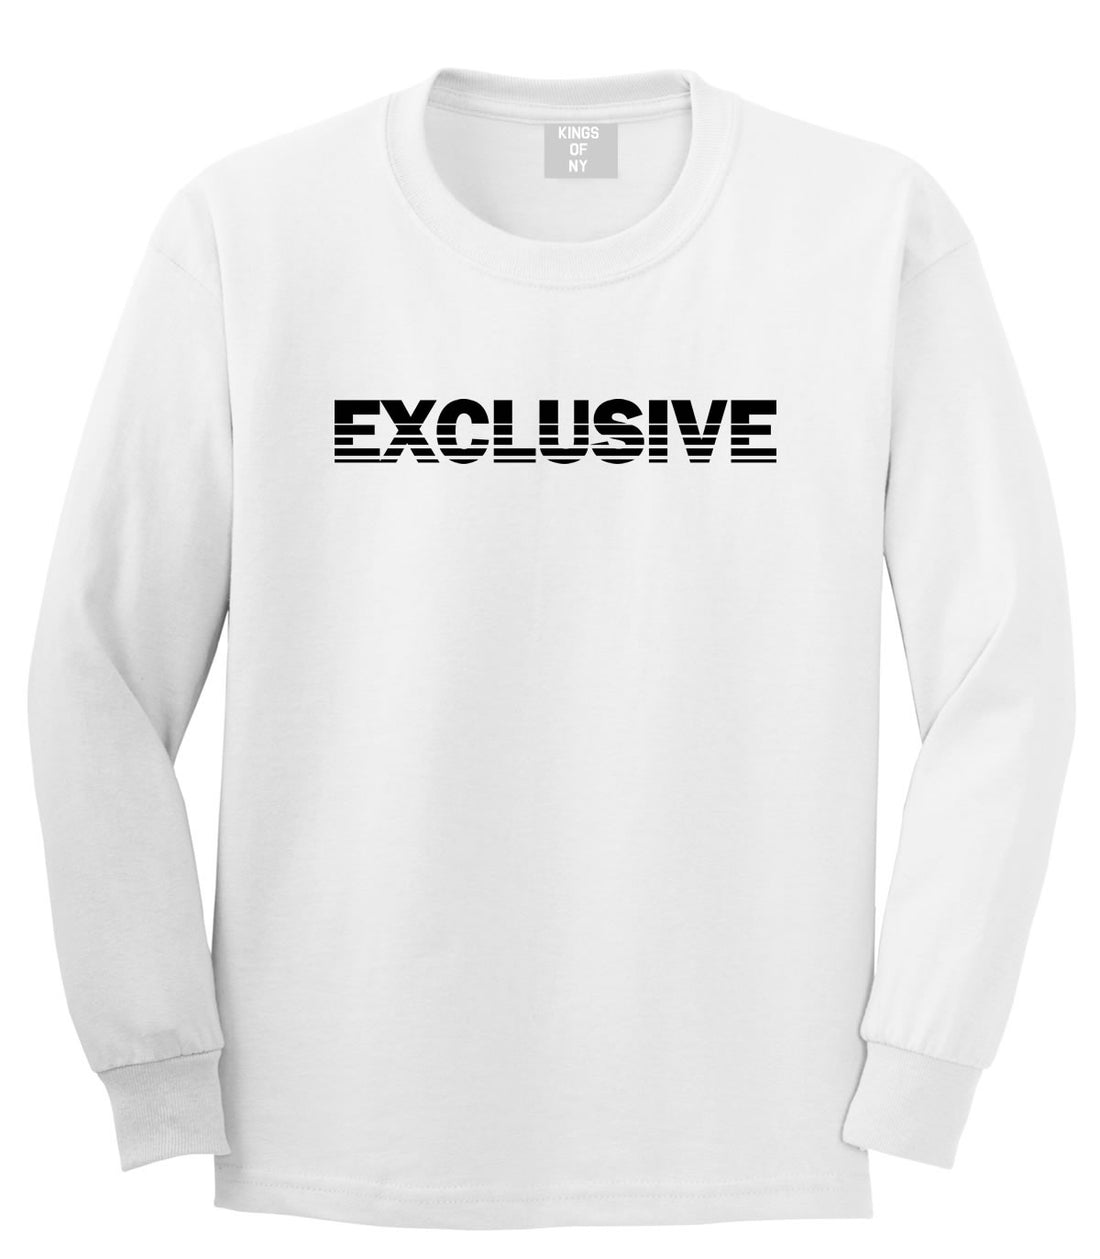 Exclusive Racing Style Boys Kids Long Sleeve T-Shirt in White by Kings Of NY